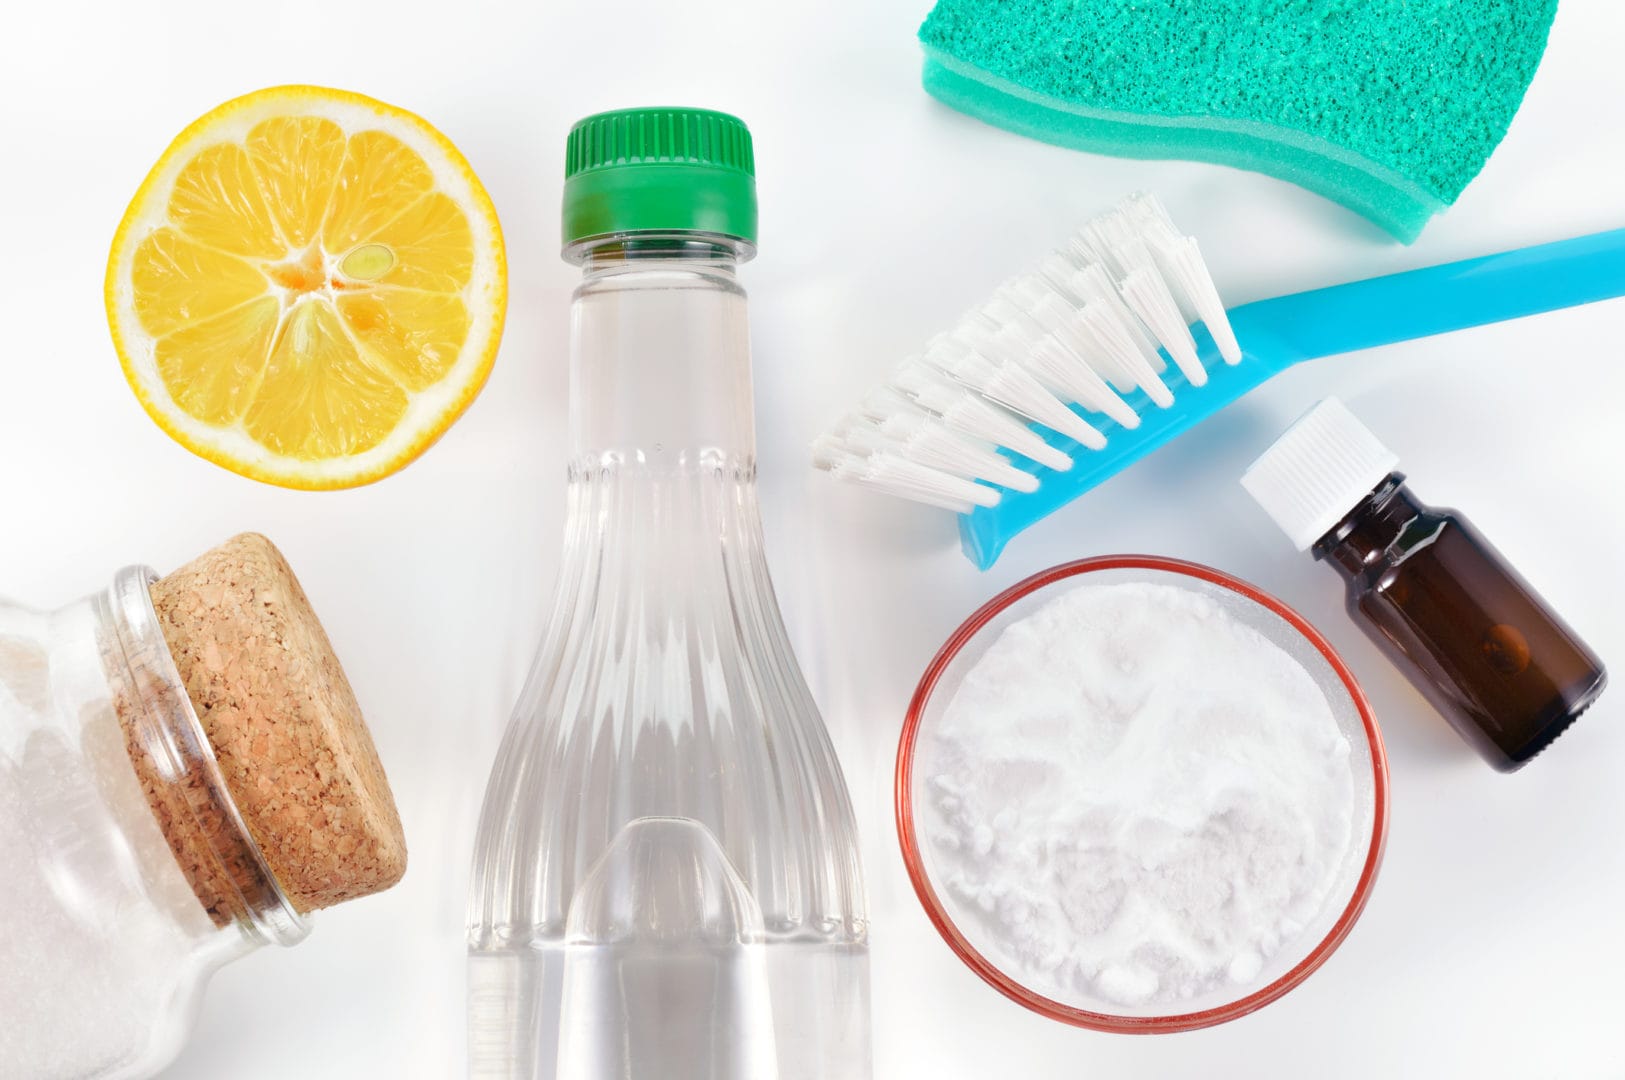 Green cleaning: 7 natural solutions that really work